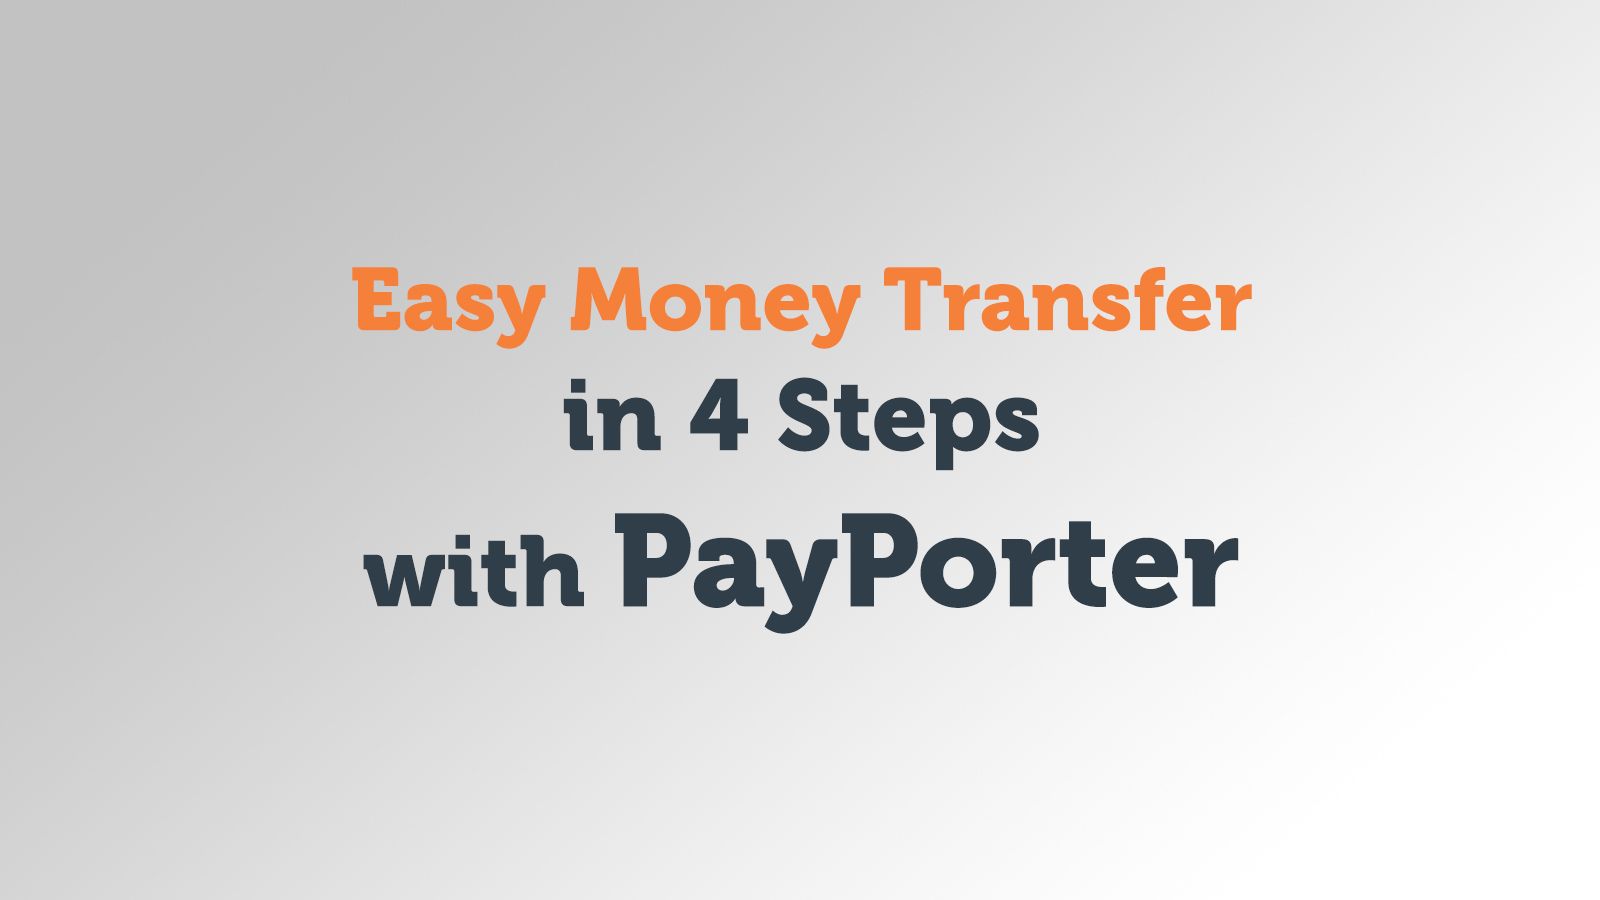 Easy Money Transfer in 4 Steps with PayPorter